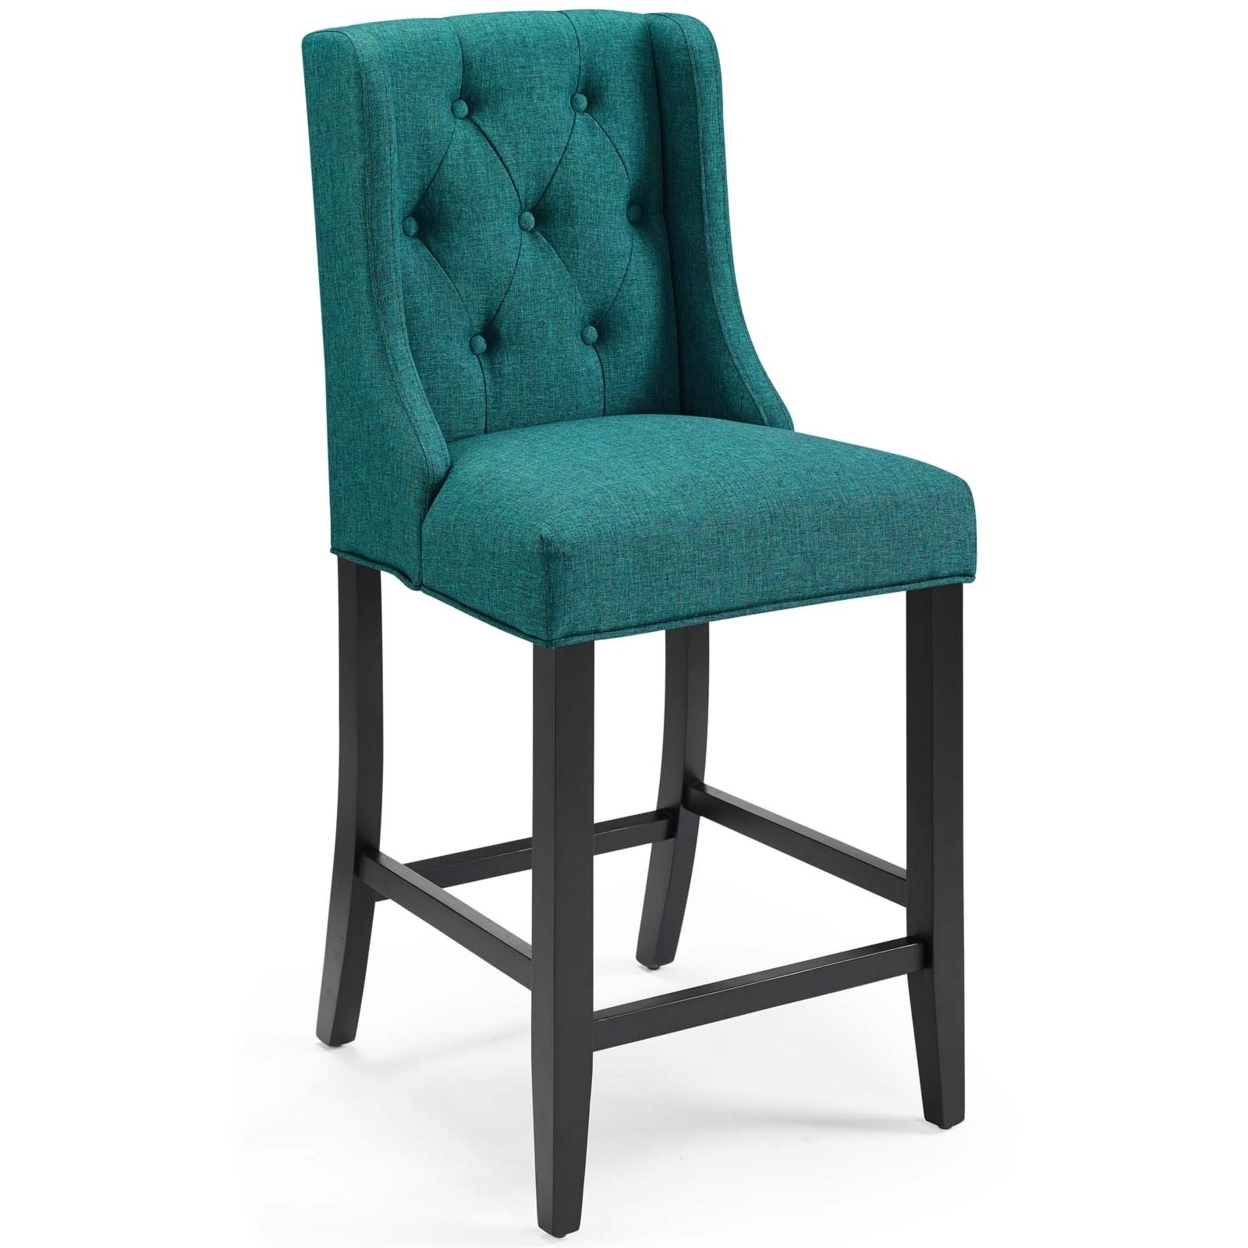 Baronet Tufted Button Upholstered Fabric Counter Stool,Teal